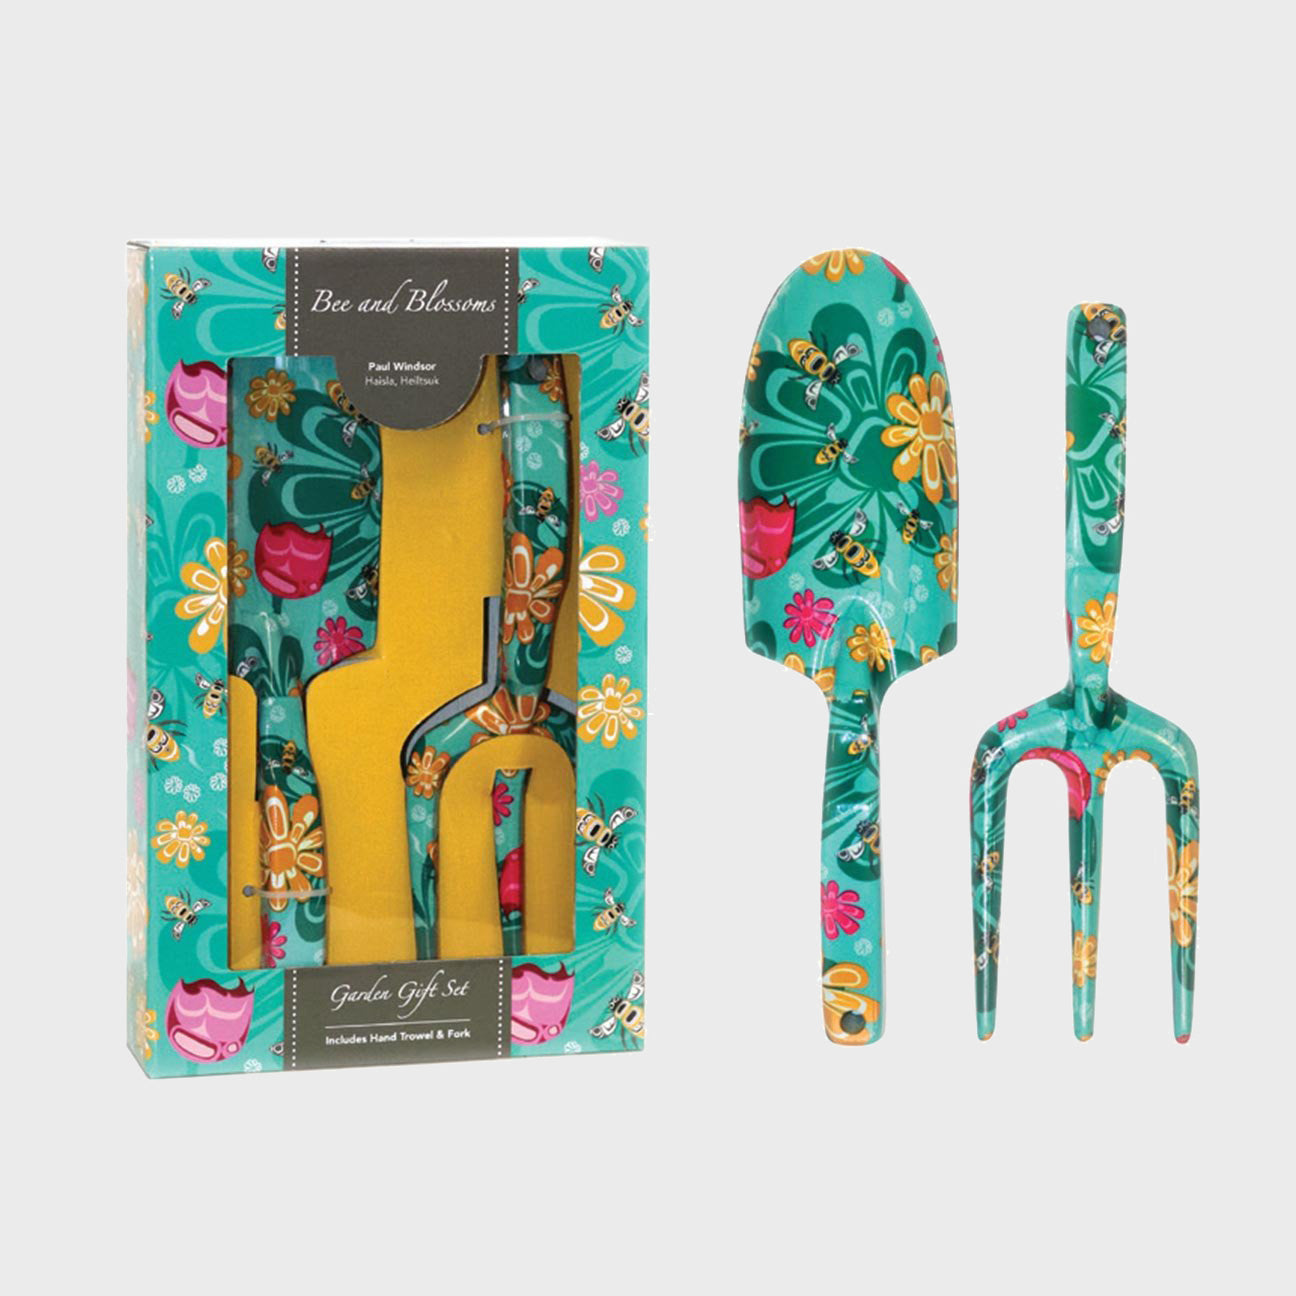 Garden Gift Set - Bee and Blossoms by Paul Windsor